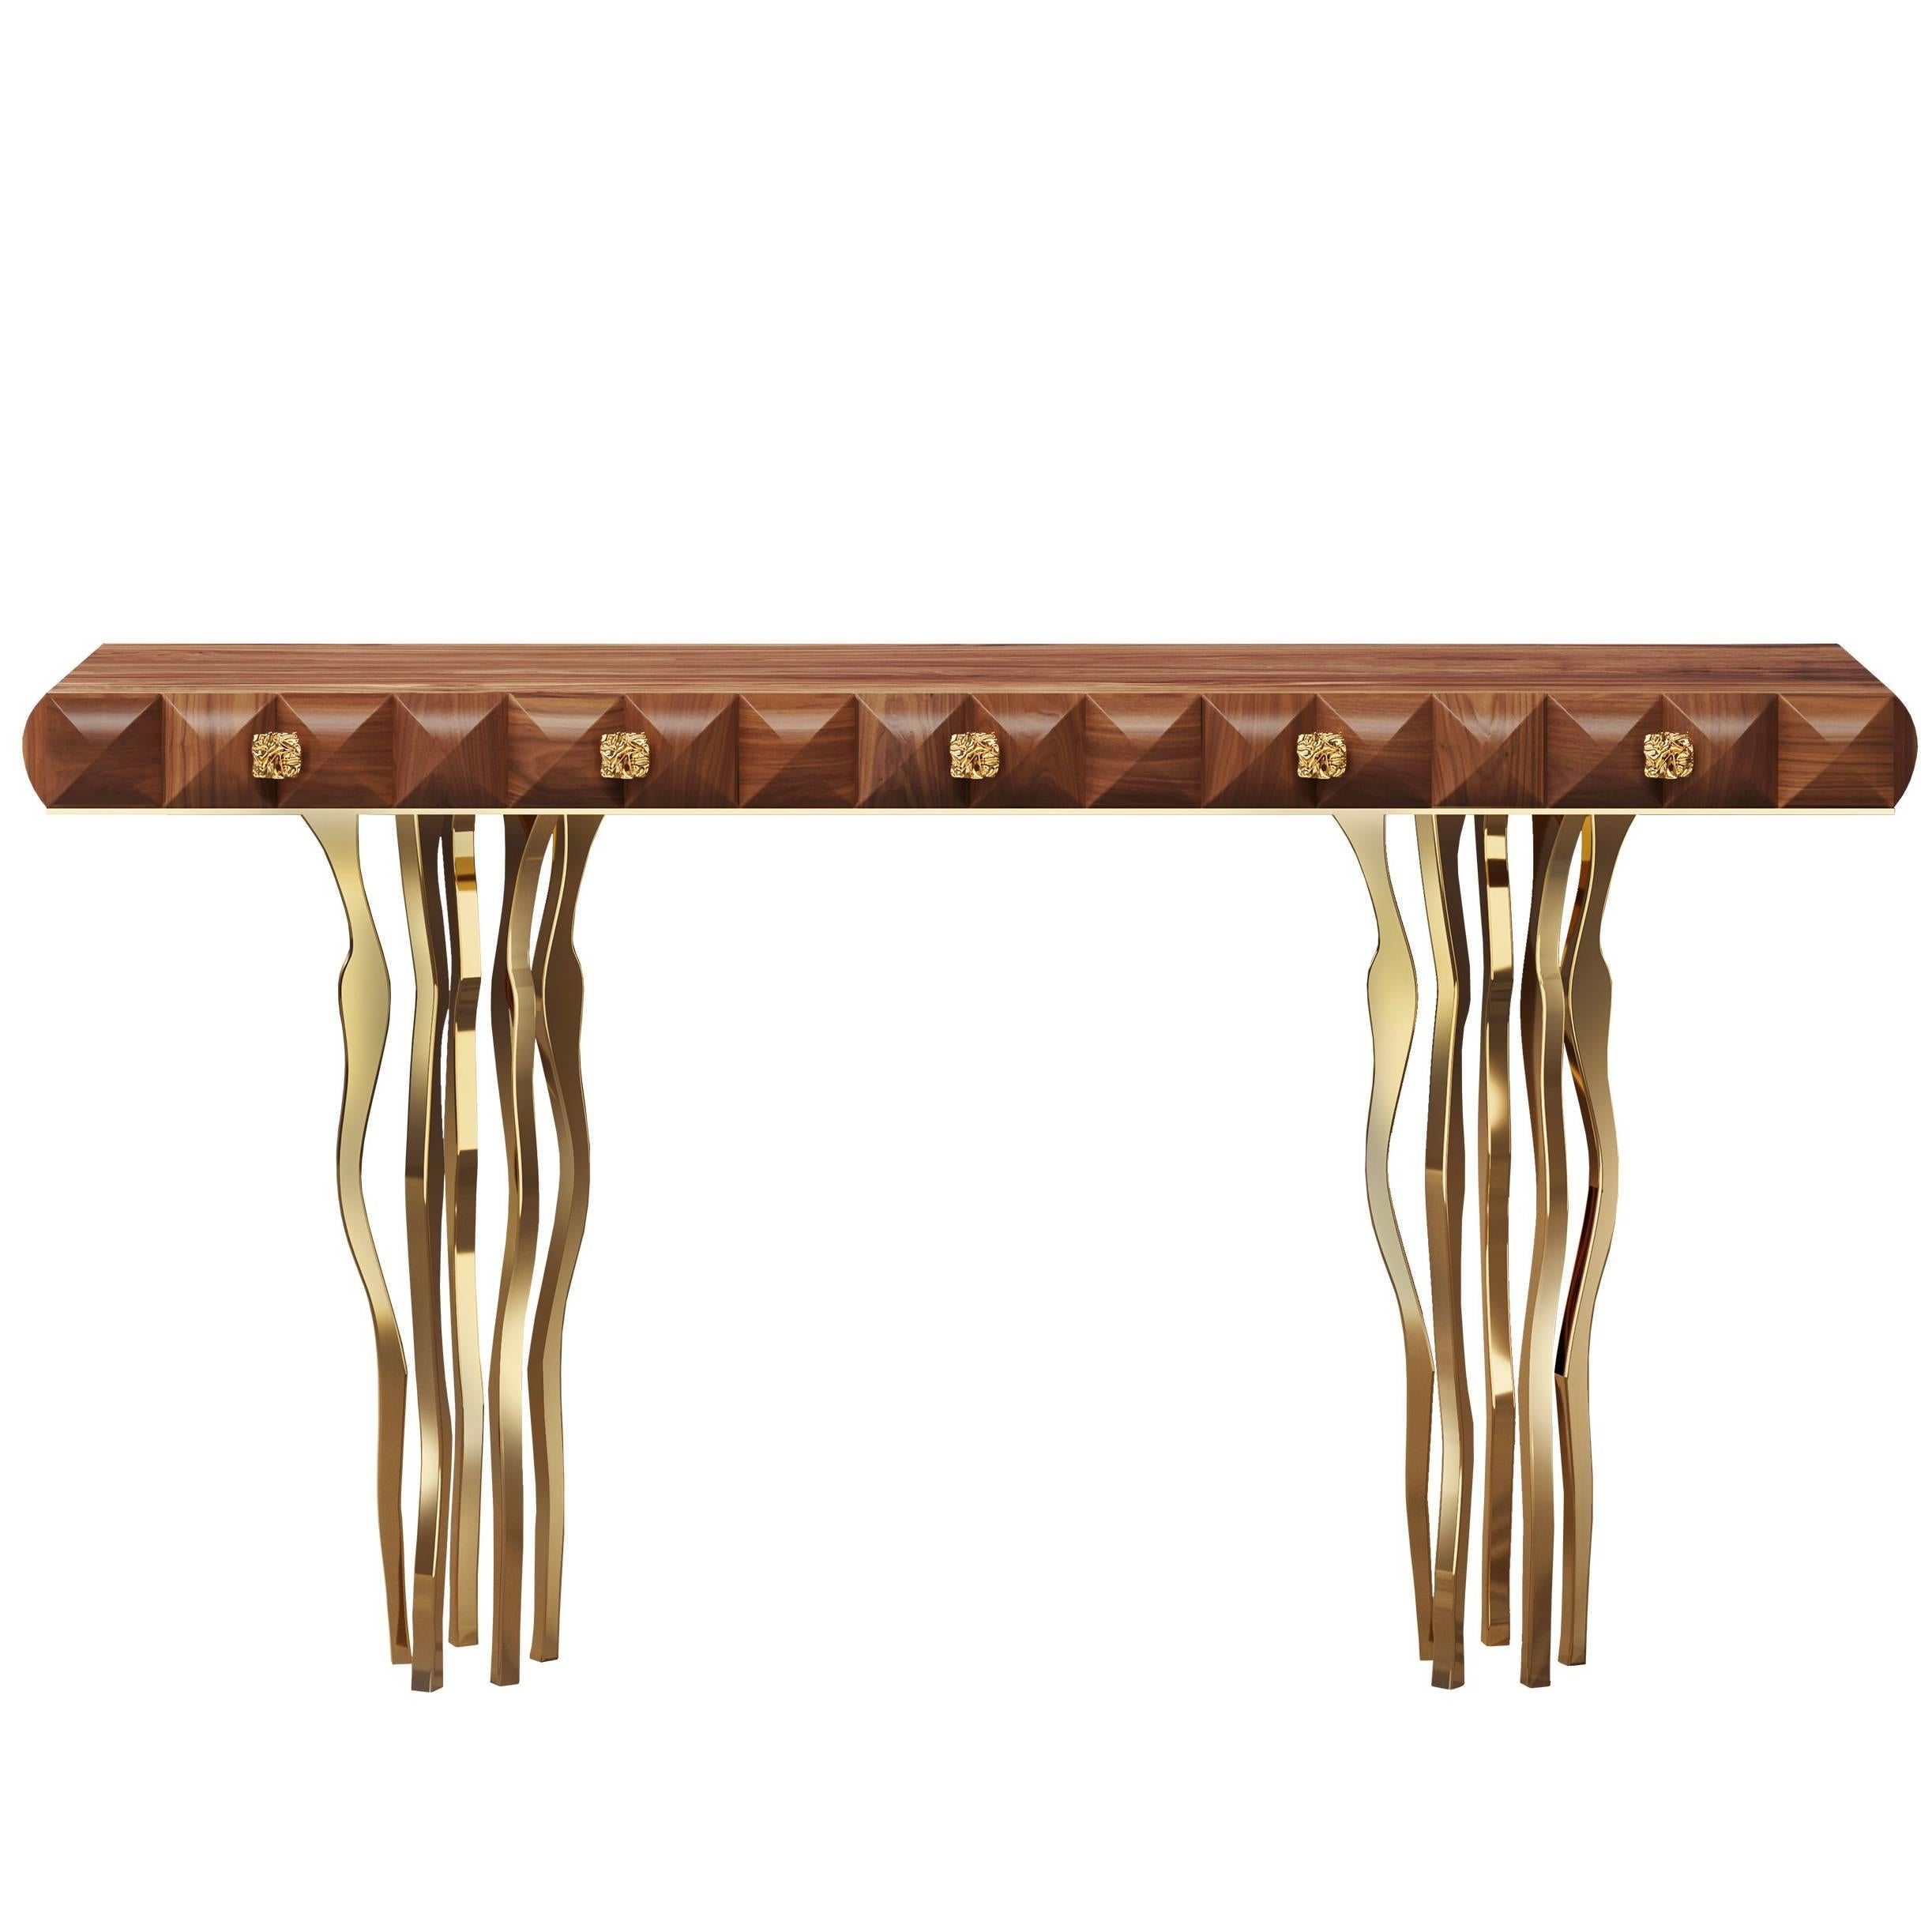 "Il Pezzo 10 Console" solid walnut - polished brass casting base - three drawers